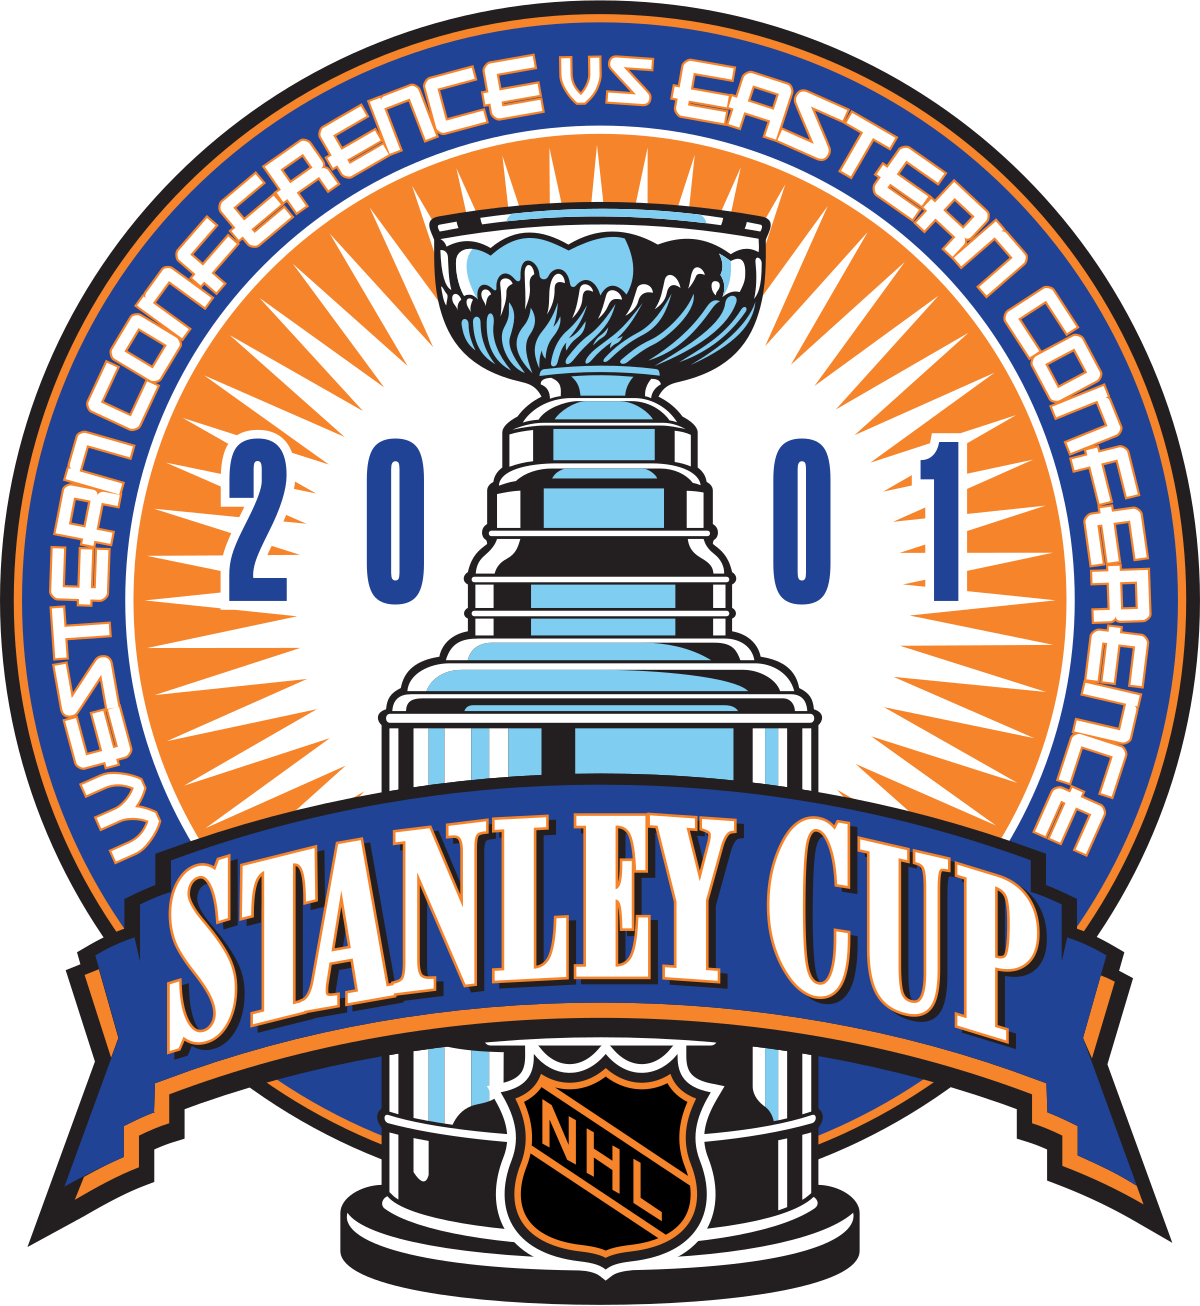 Stanley Cup Finals - Wikipedia